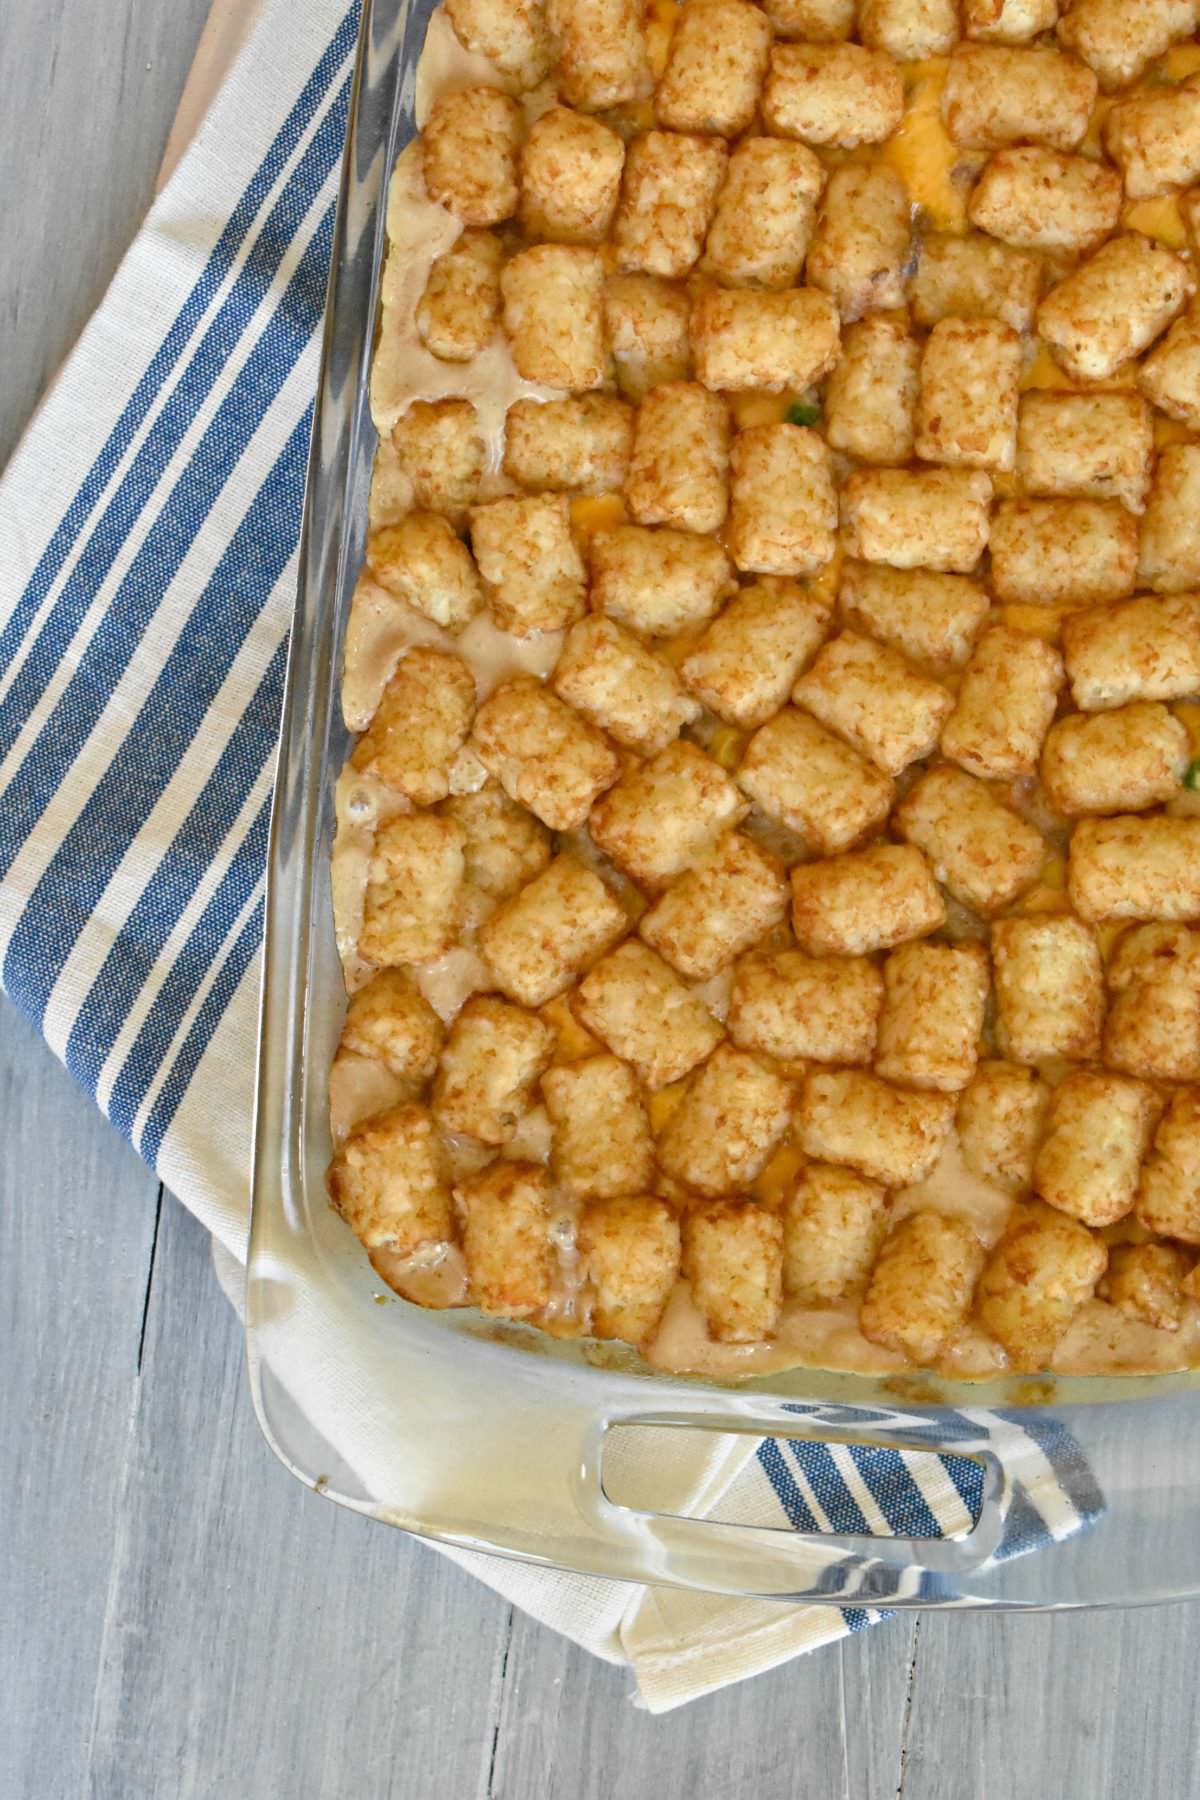 Super easy and Cheesy tater tot casserole - My Mommy Style